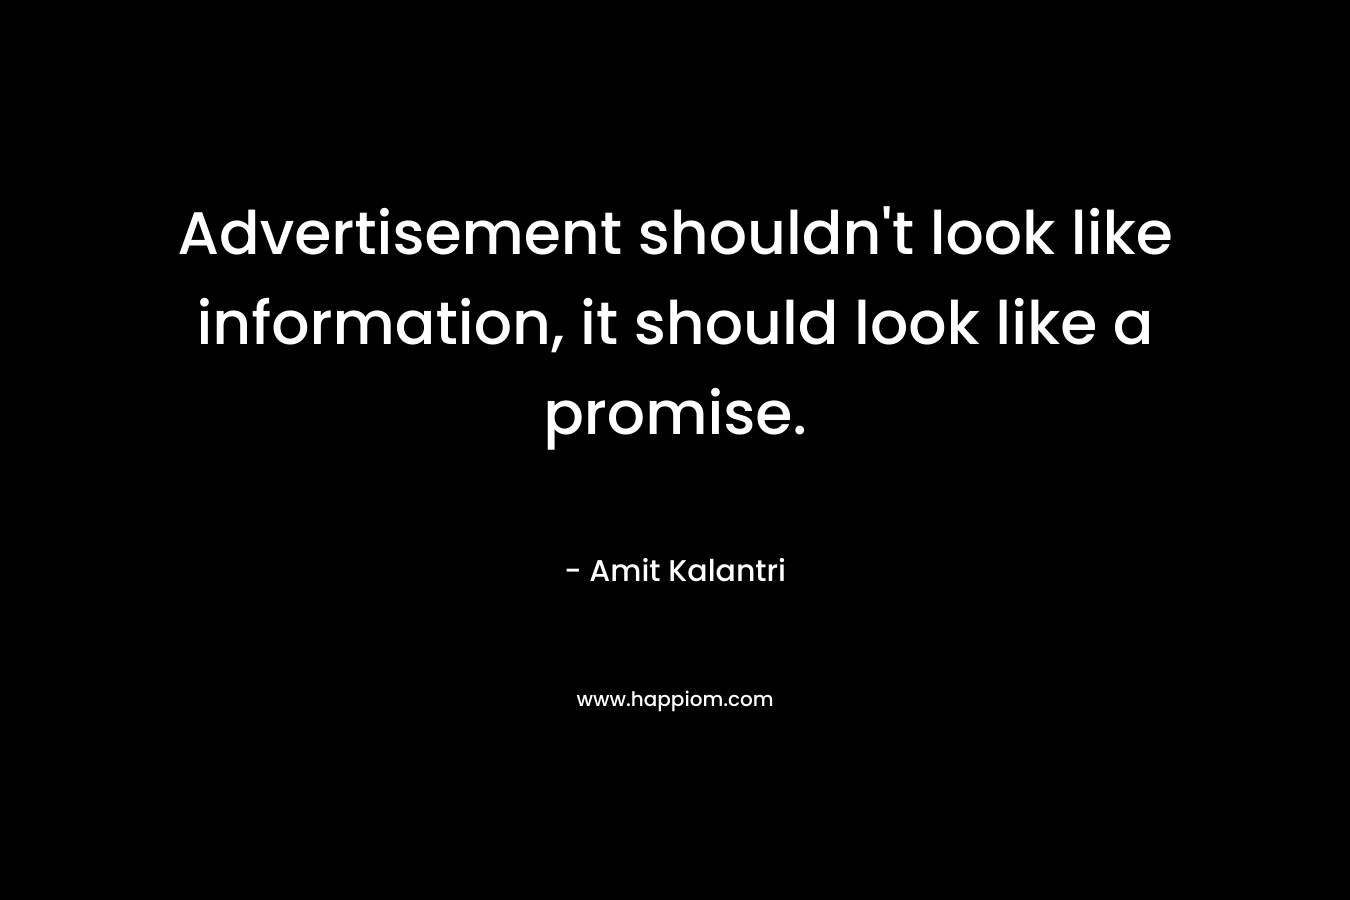 Advertisement shouldn't look like information, it should look like a promise.